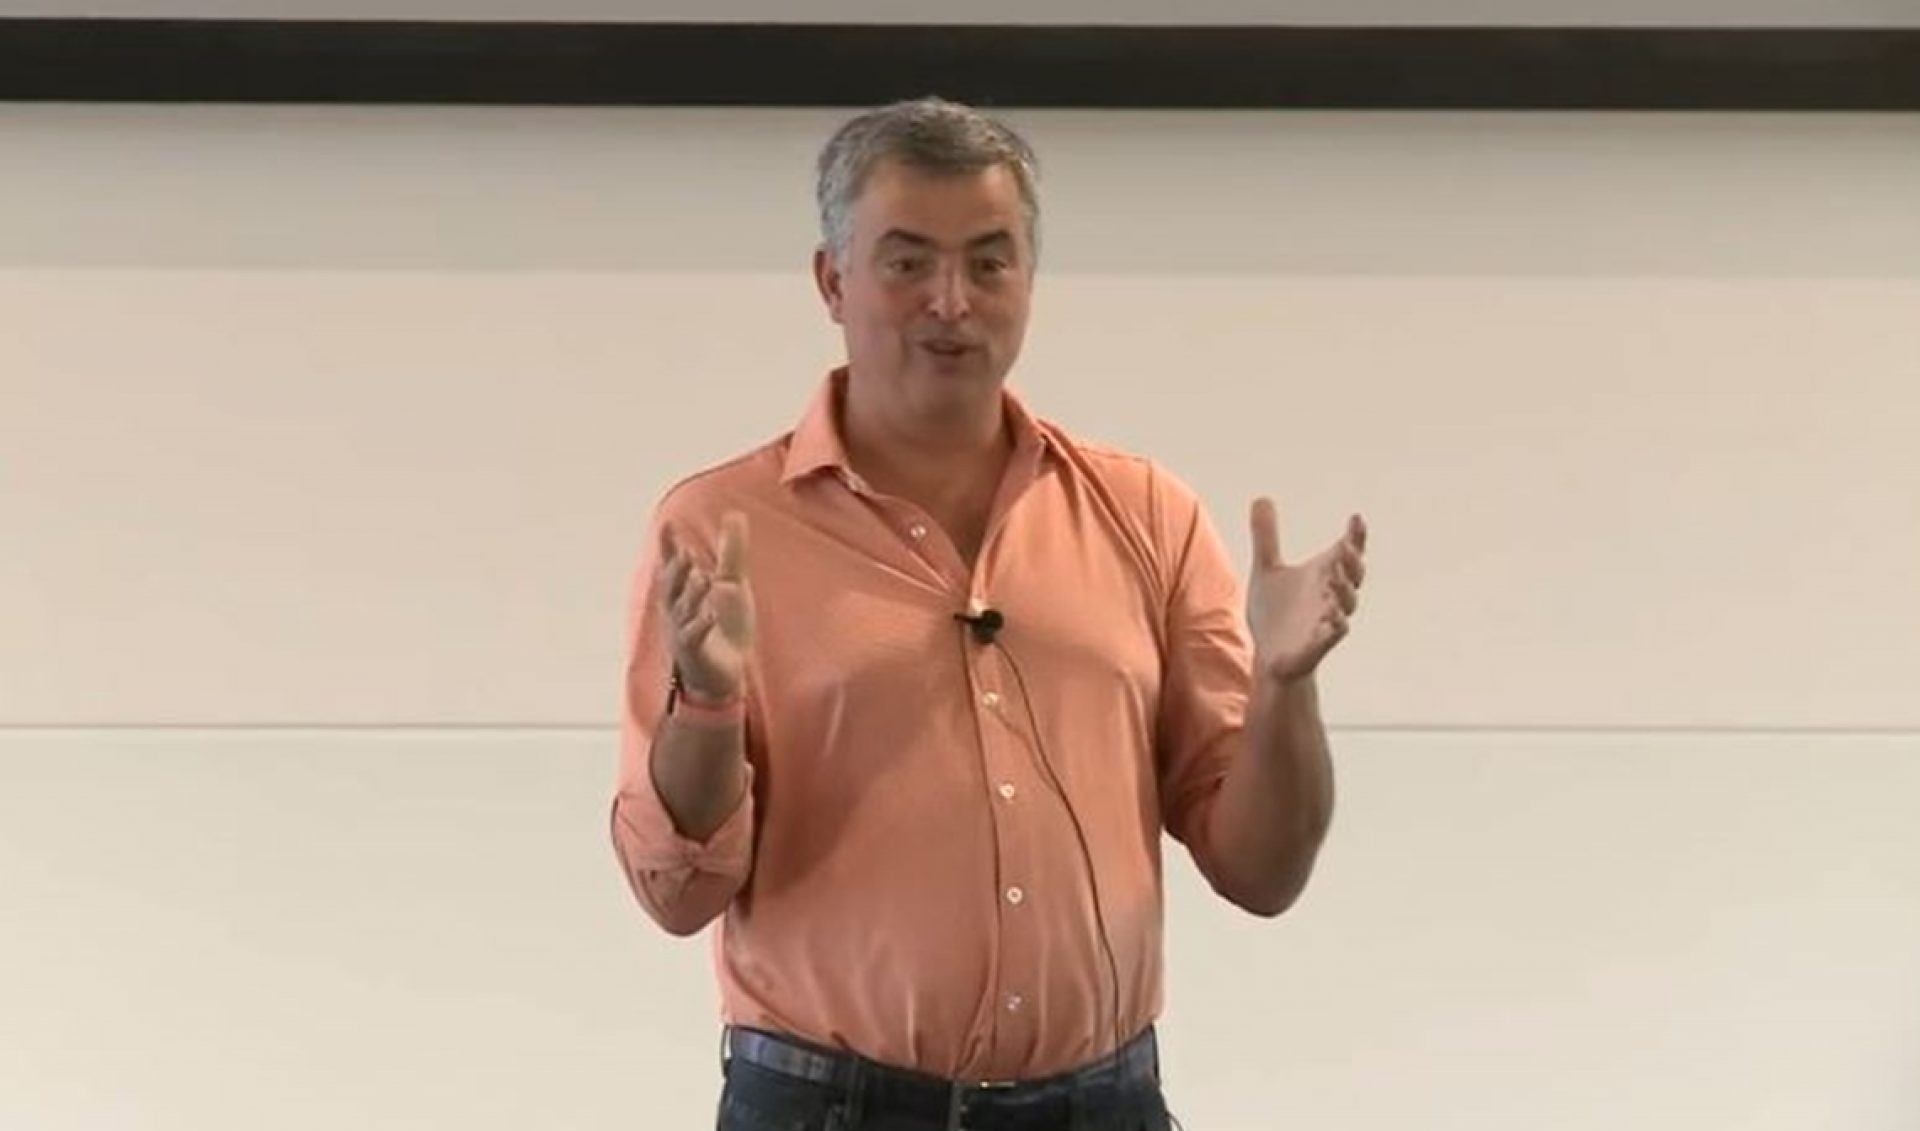 Eddy Cue On Apple’s Video Vision: Unlike Netflix, “We’re Not After Quantity”